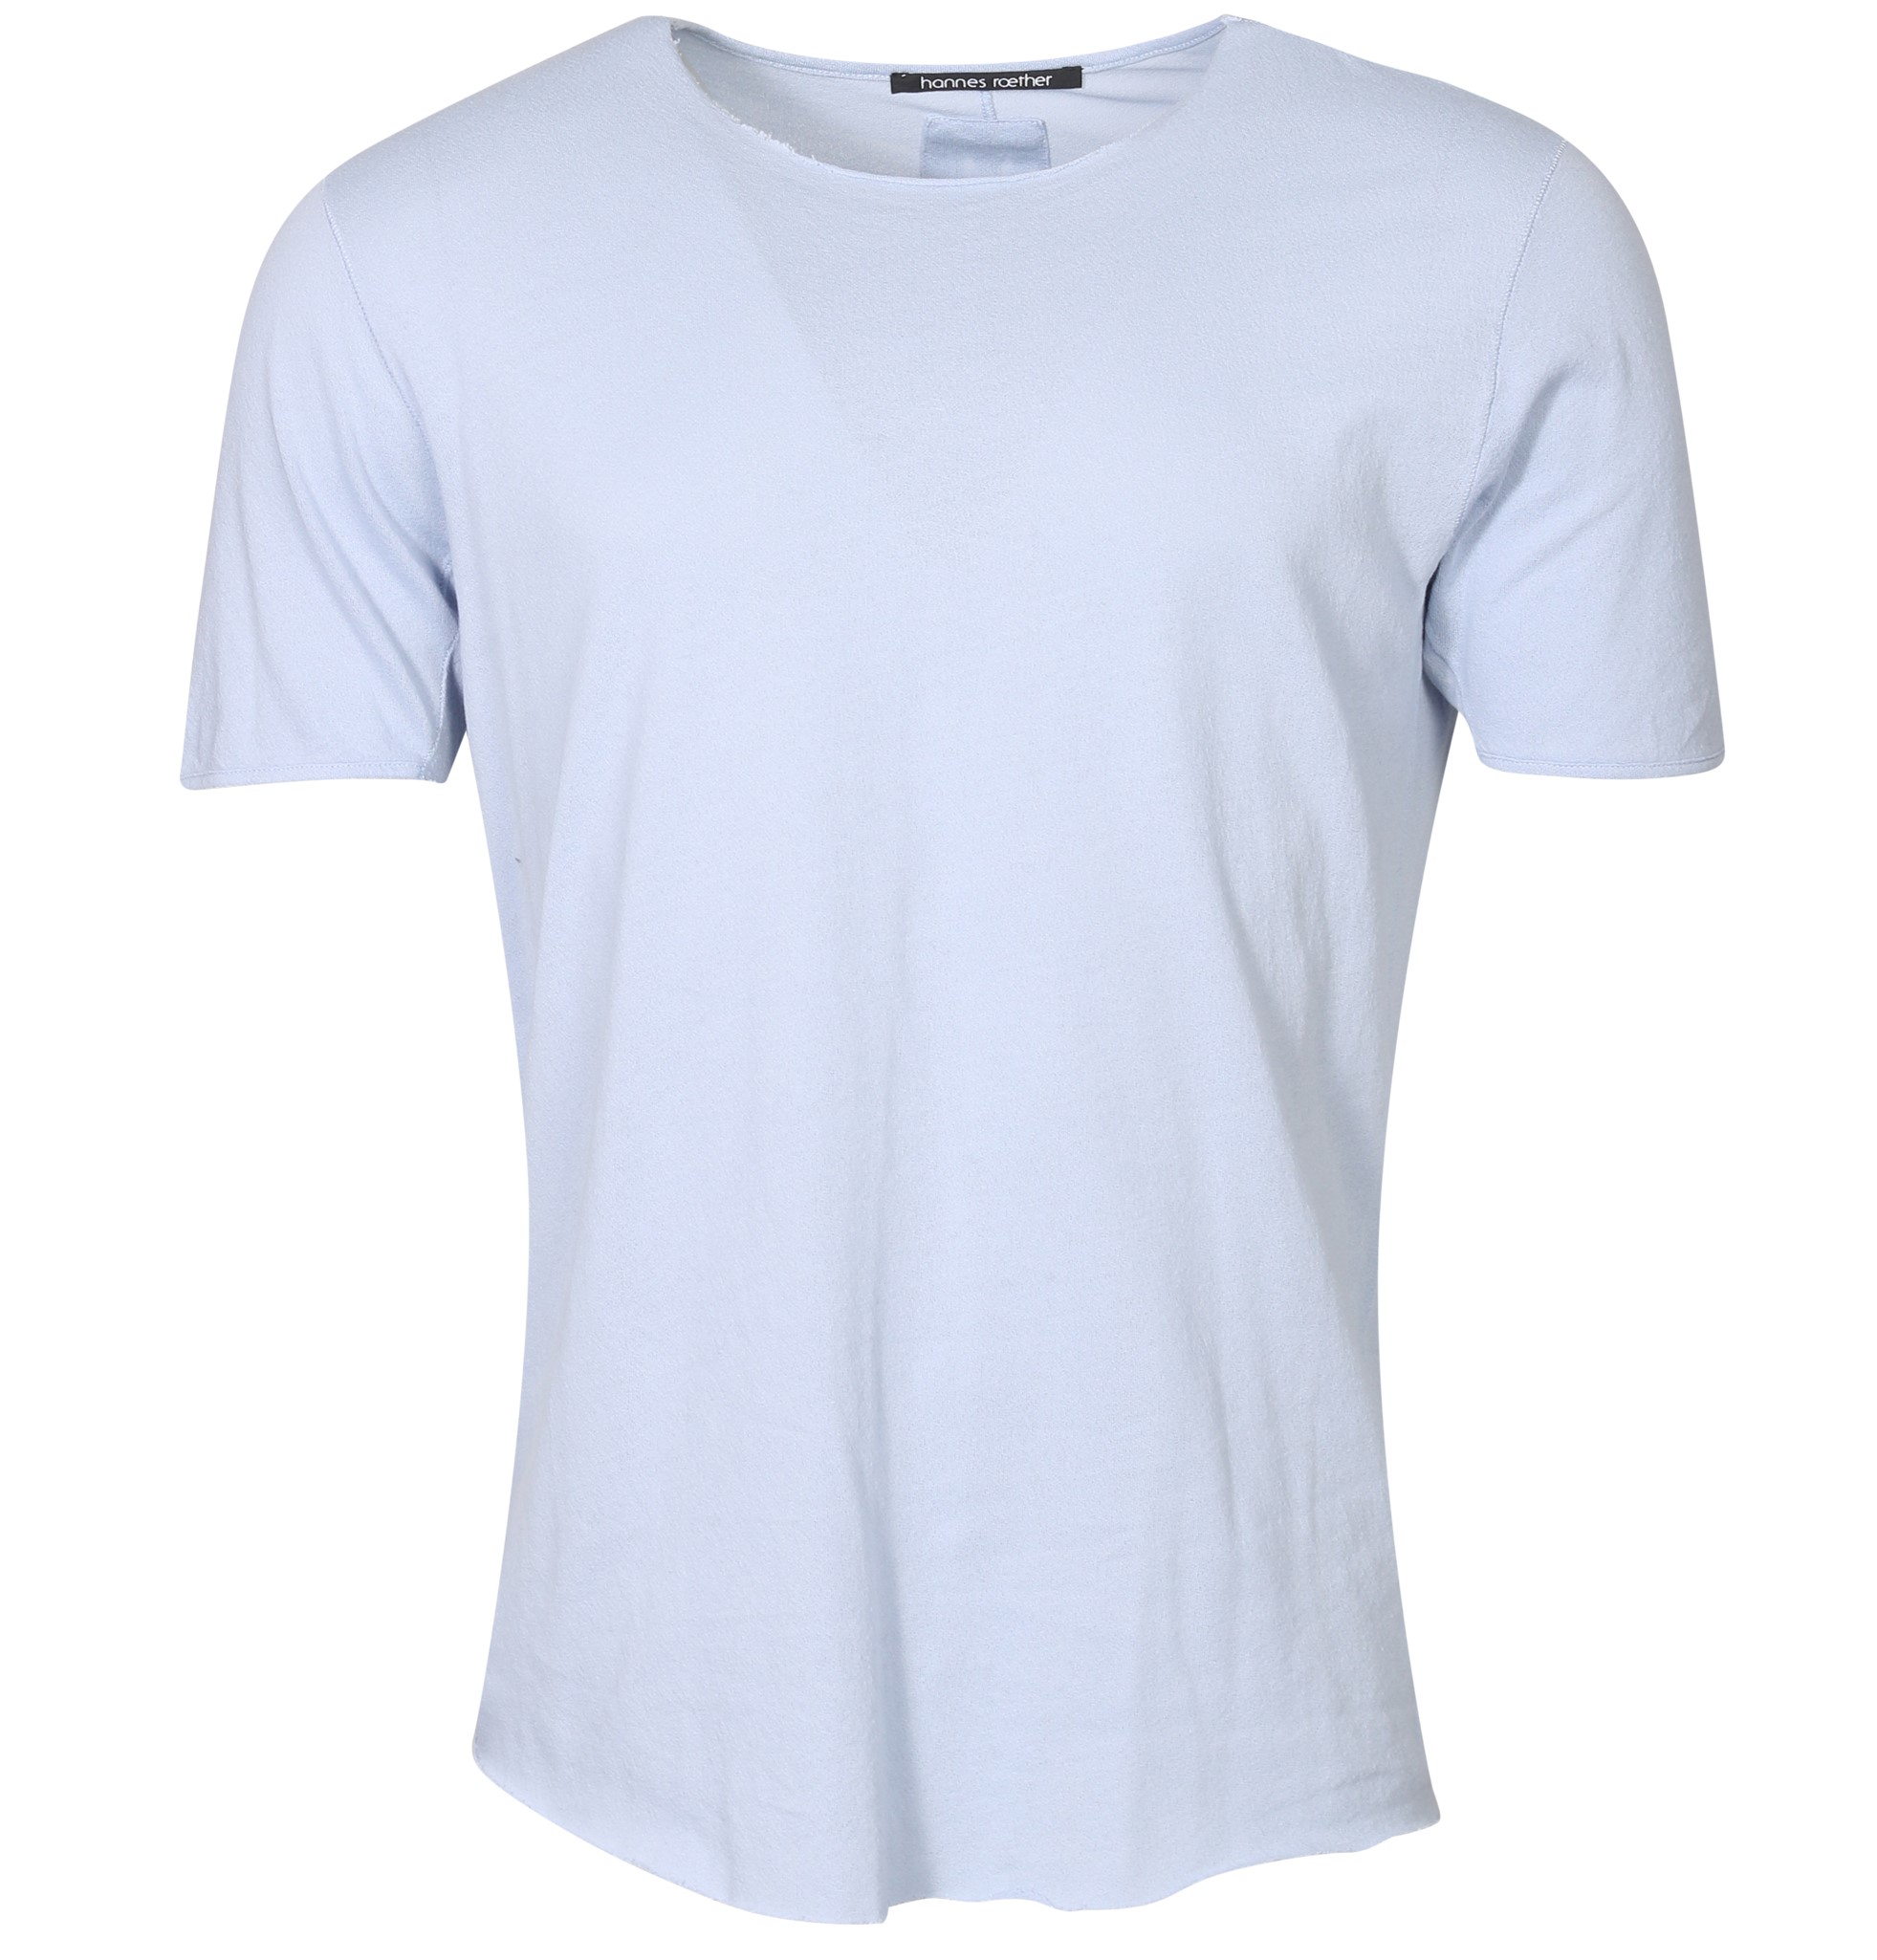 HANNES ROETHER T-Shirt in Light Blue M